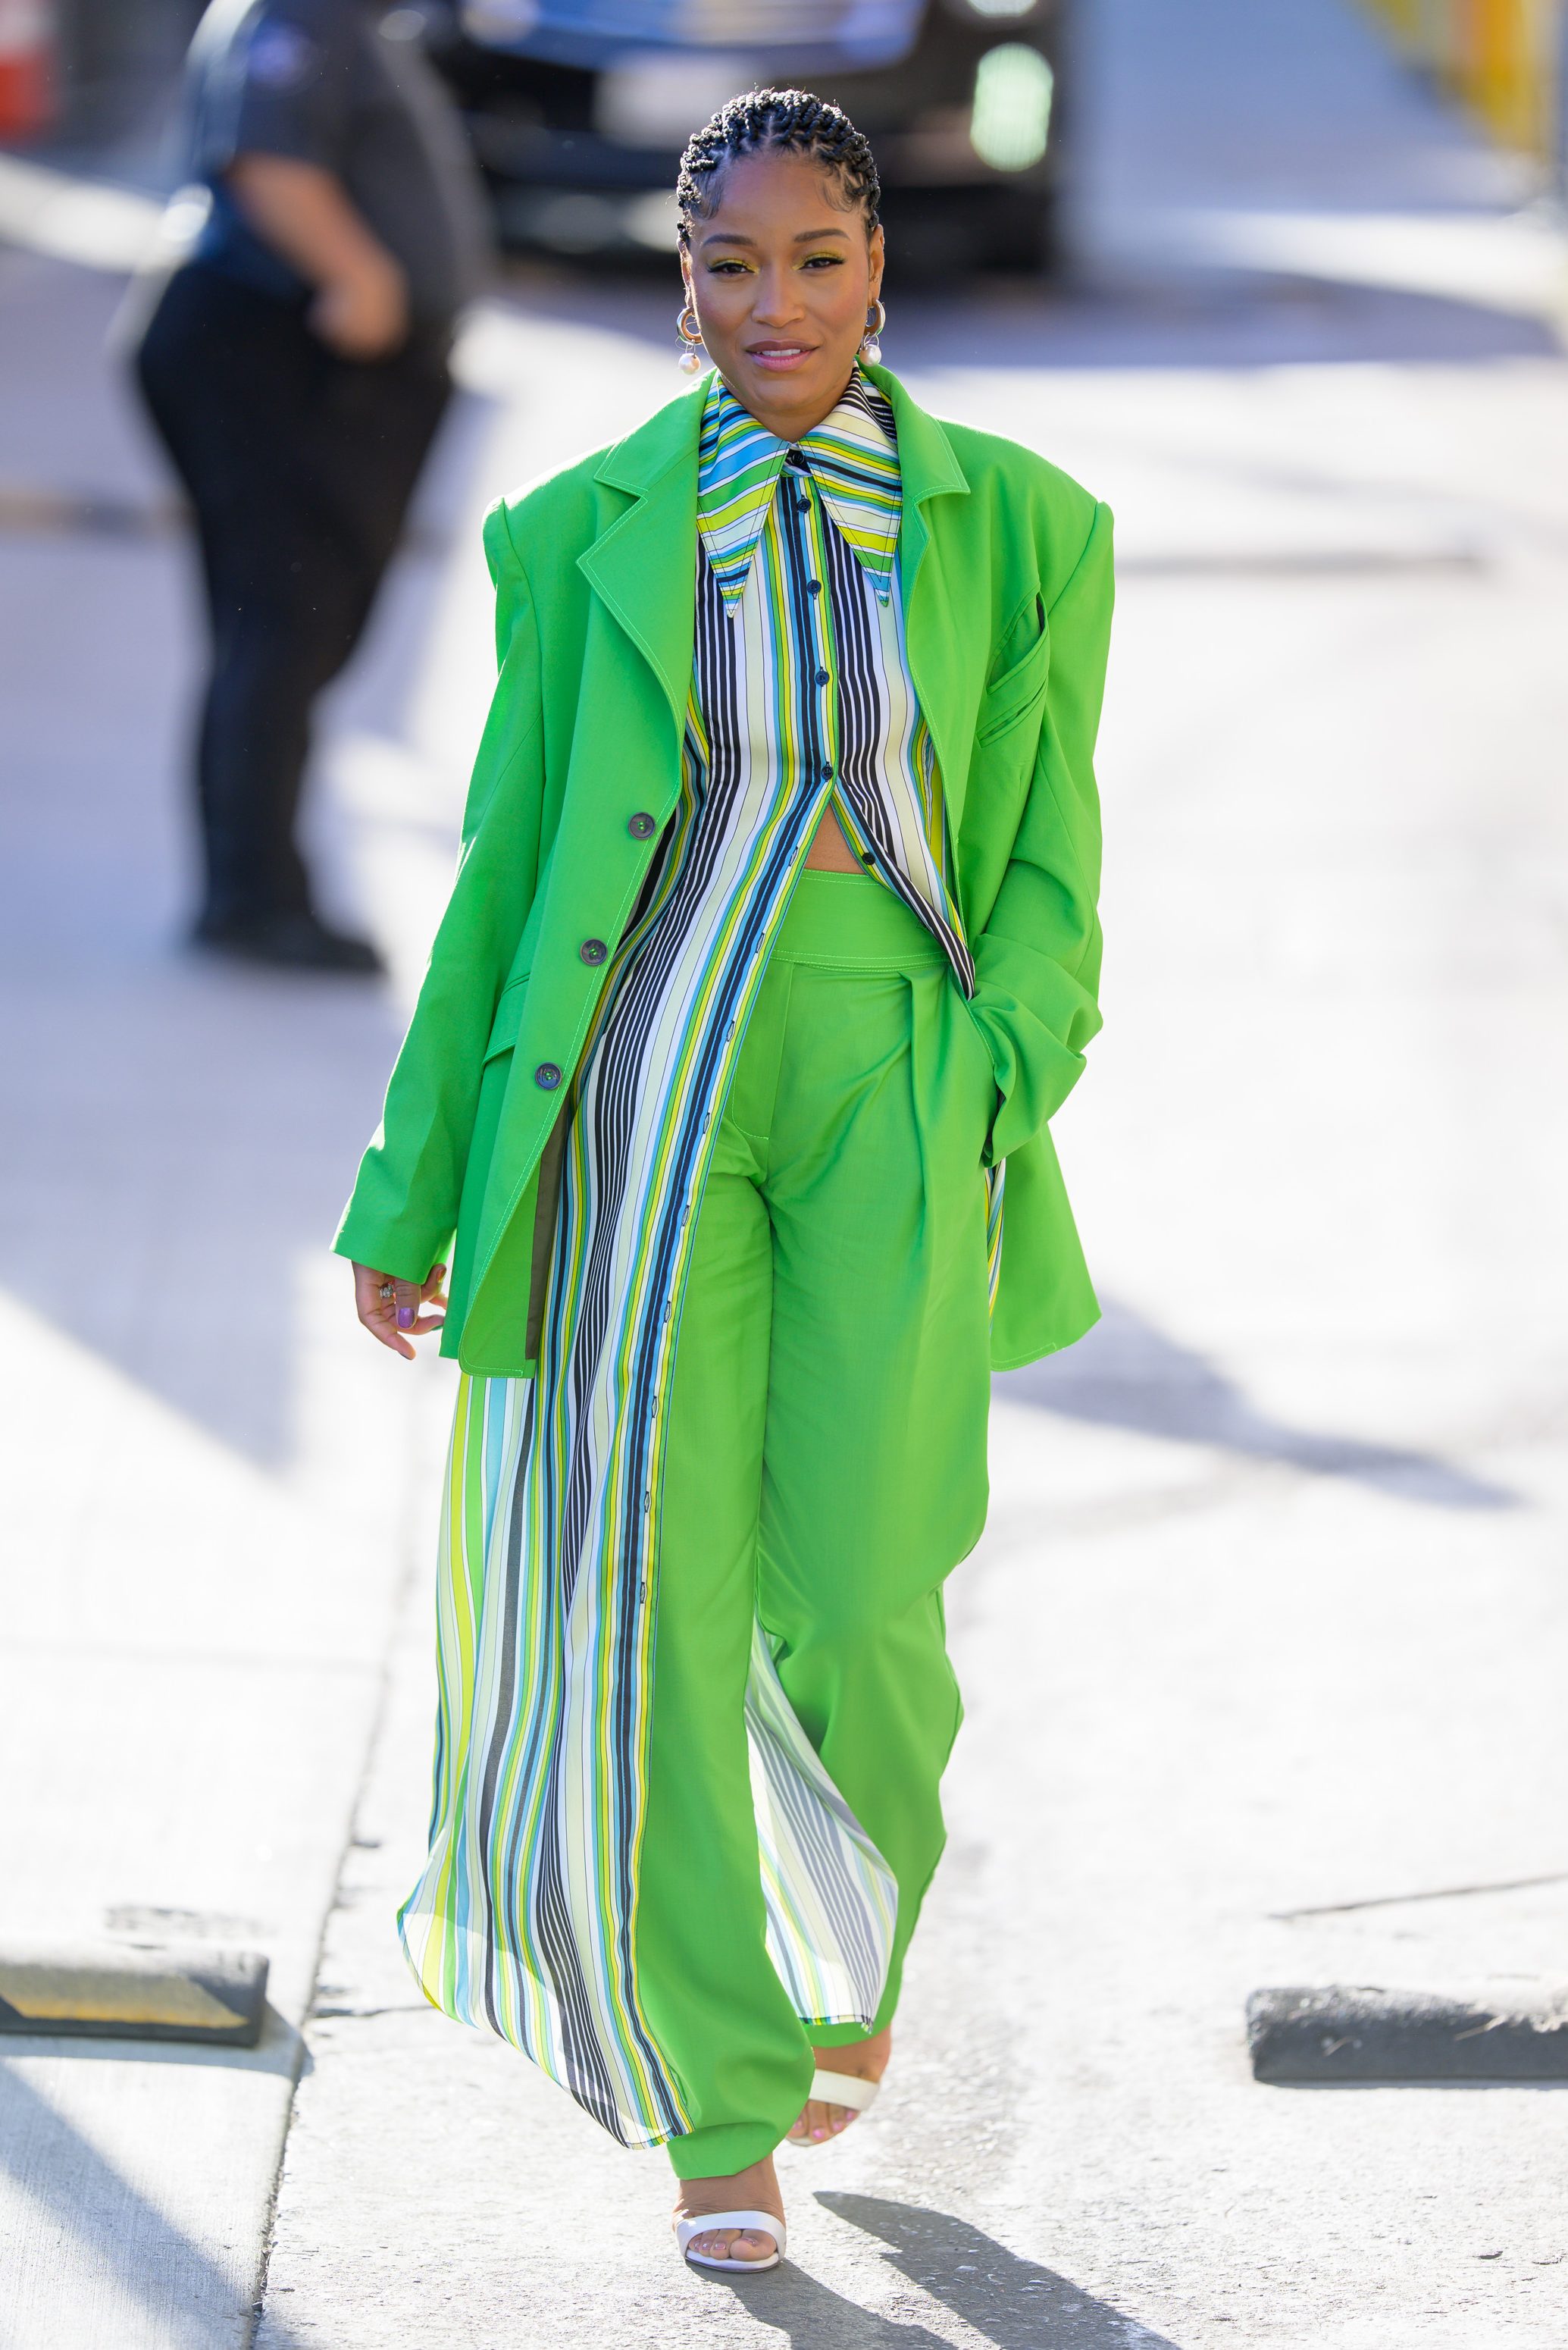 Keke Palmer's Green Suit Gives Series Saint Patrick's Day Style Inspo